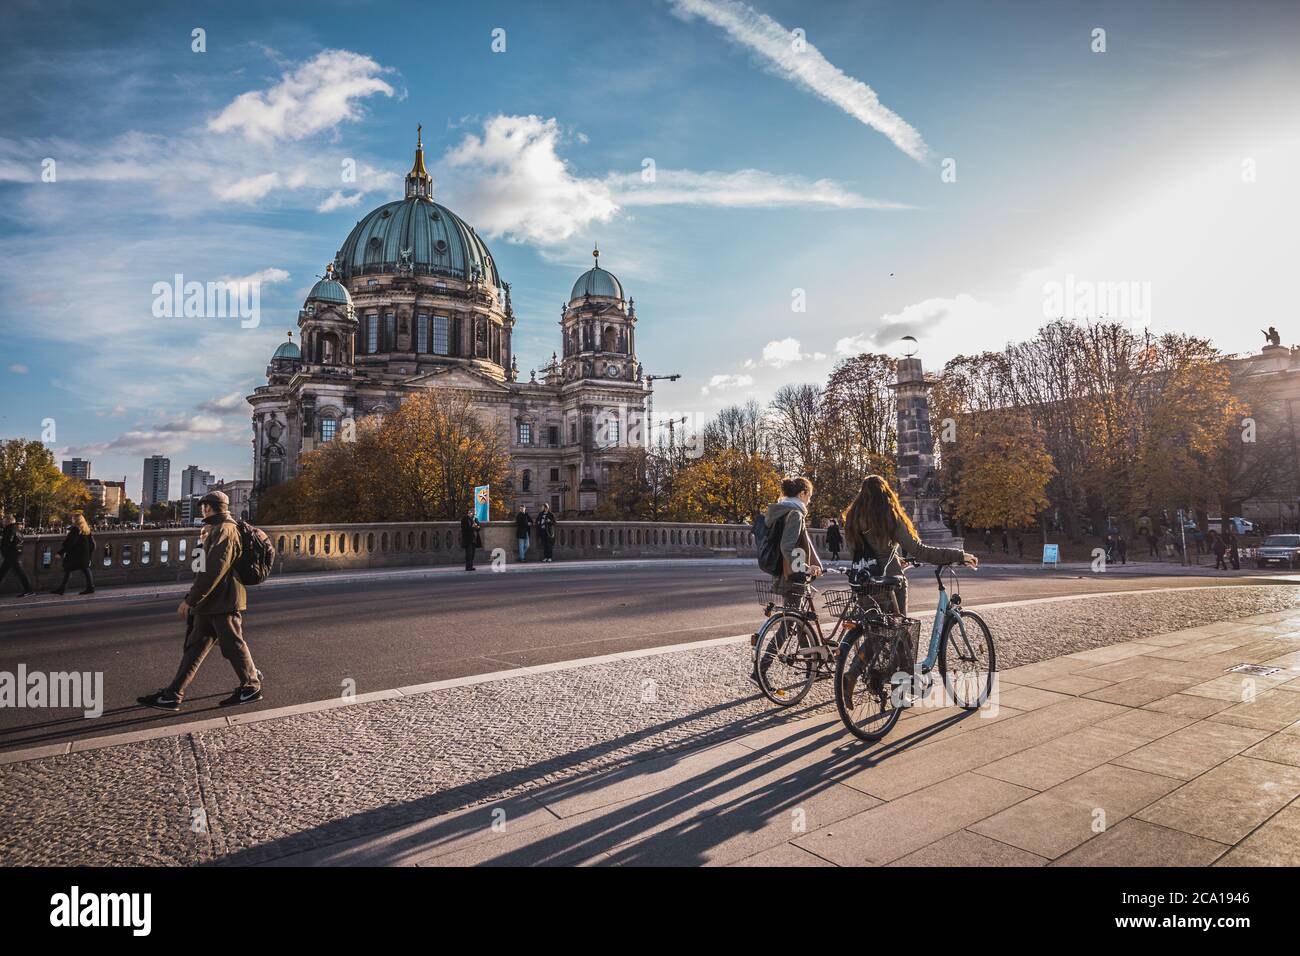 People walking in the Friedrichsbrücke (Friedrichs bridge) over Spree river and The Berlin Cathedral (Berliner Dom) in the background in Berlin Stock Photo